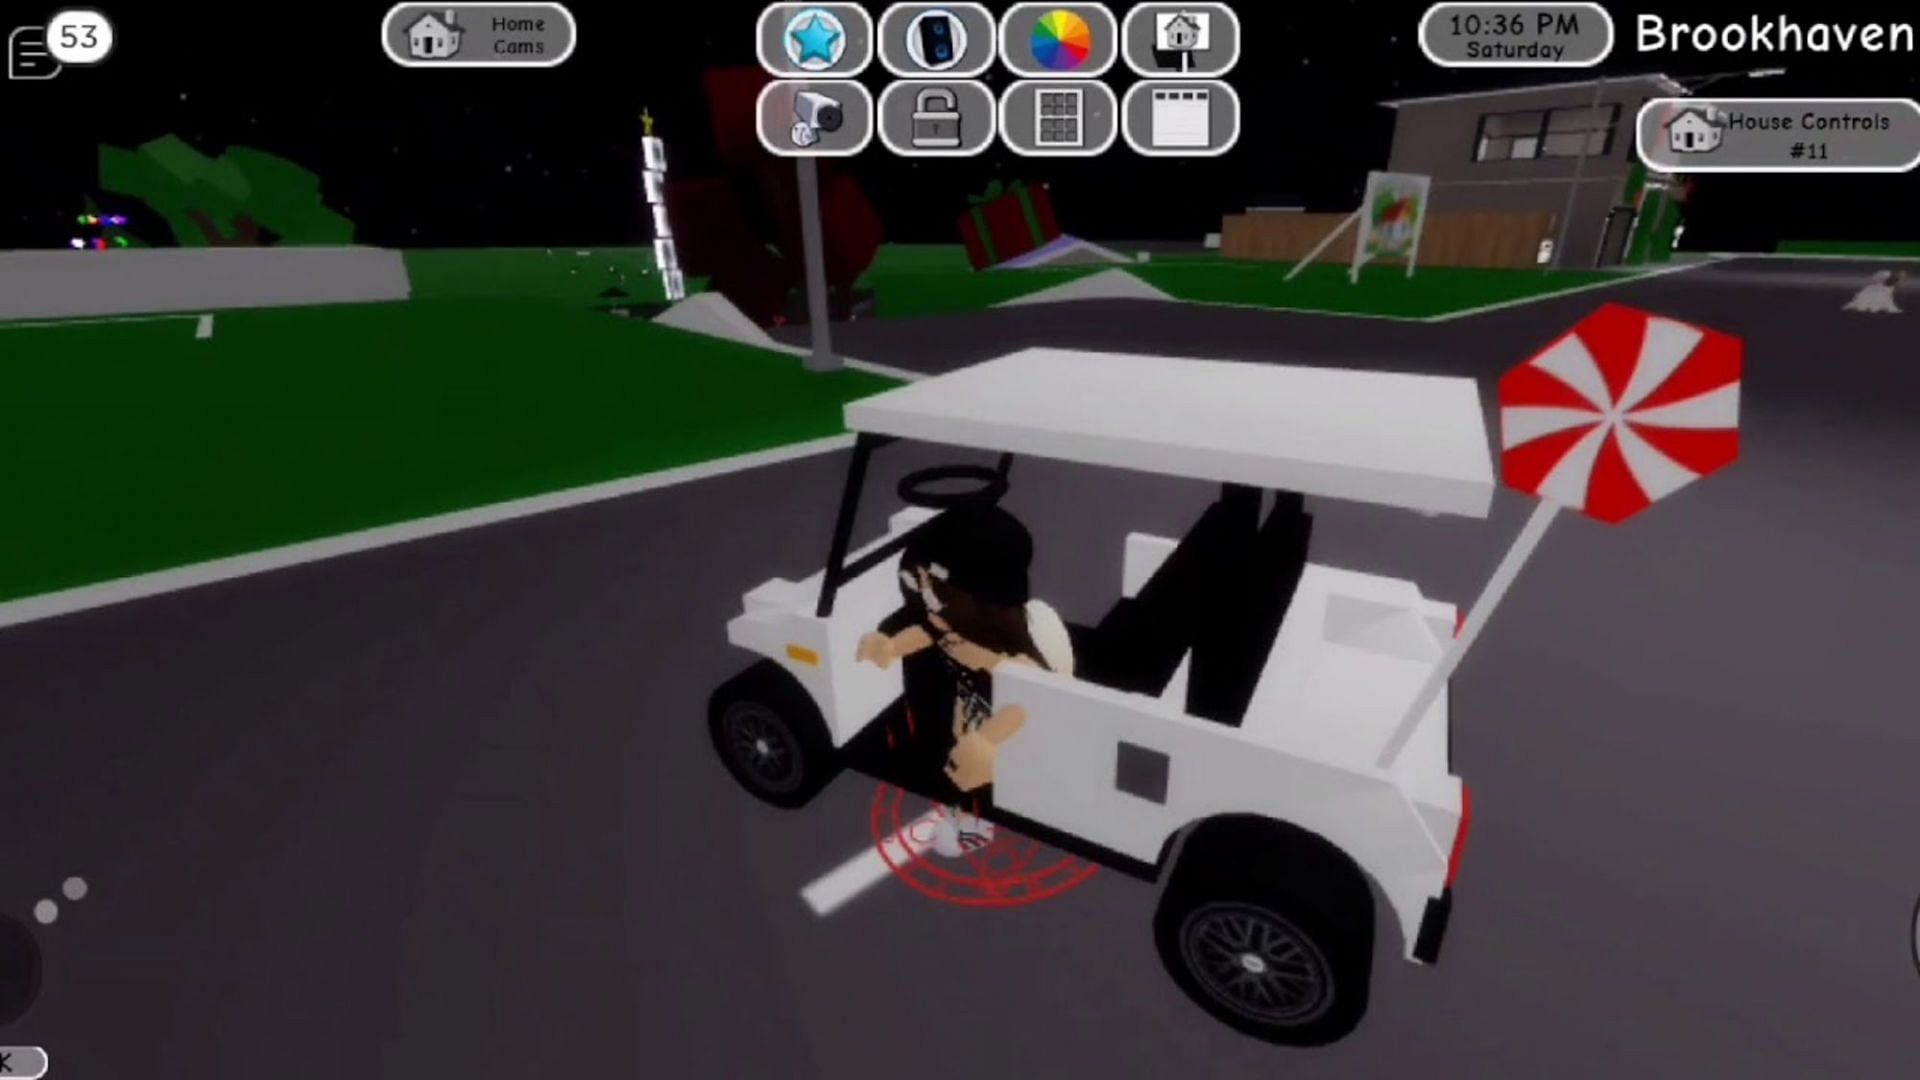 Golf cart in Roblox Brookhaven RP (Image via Roblox)